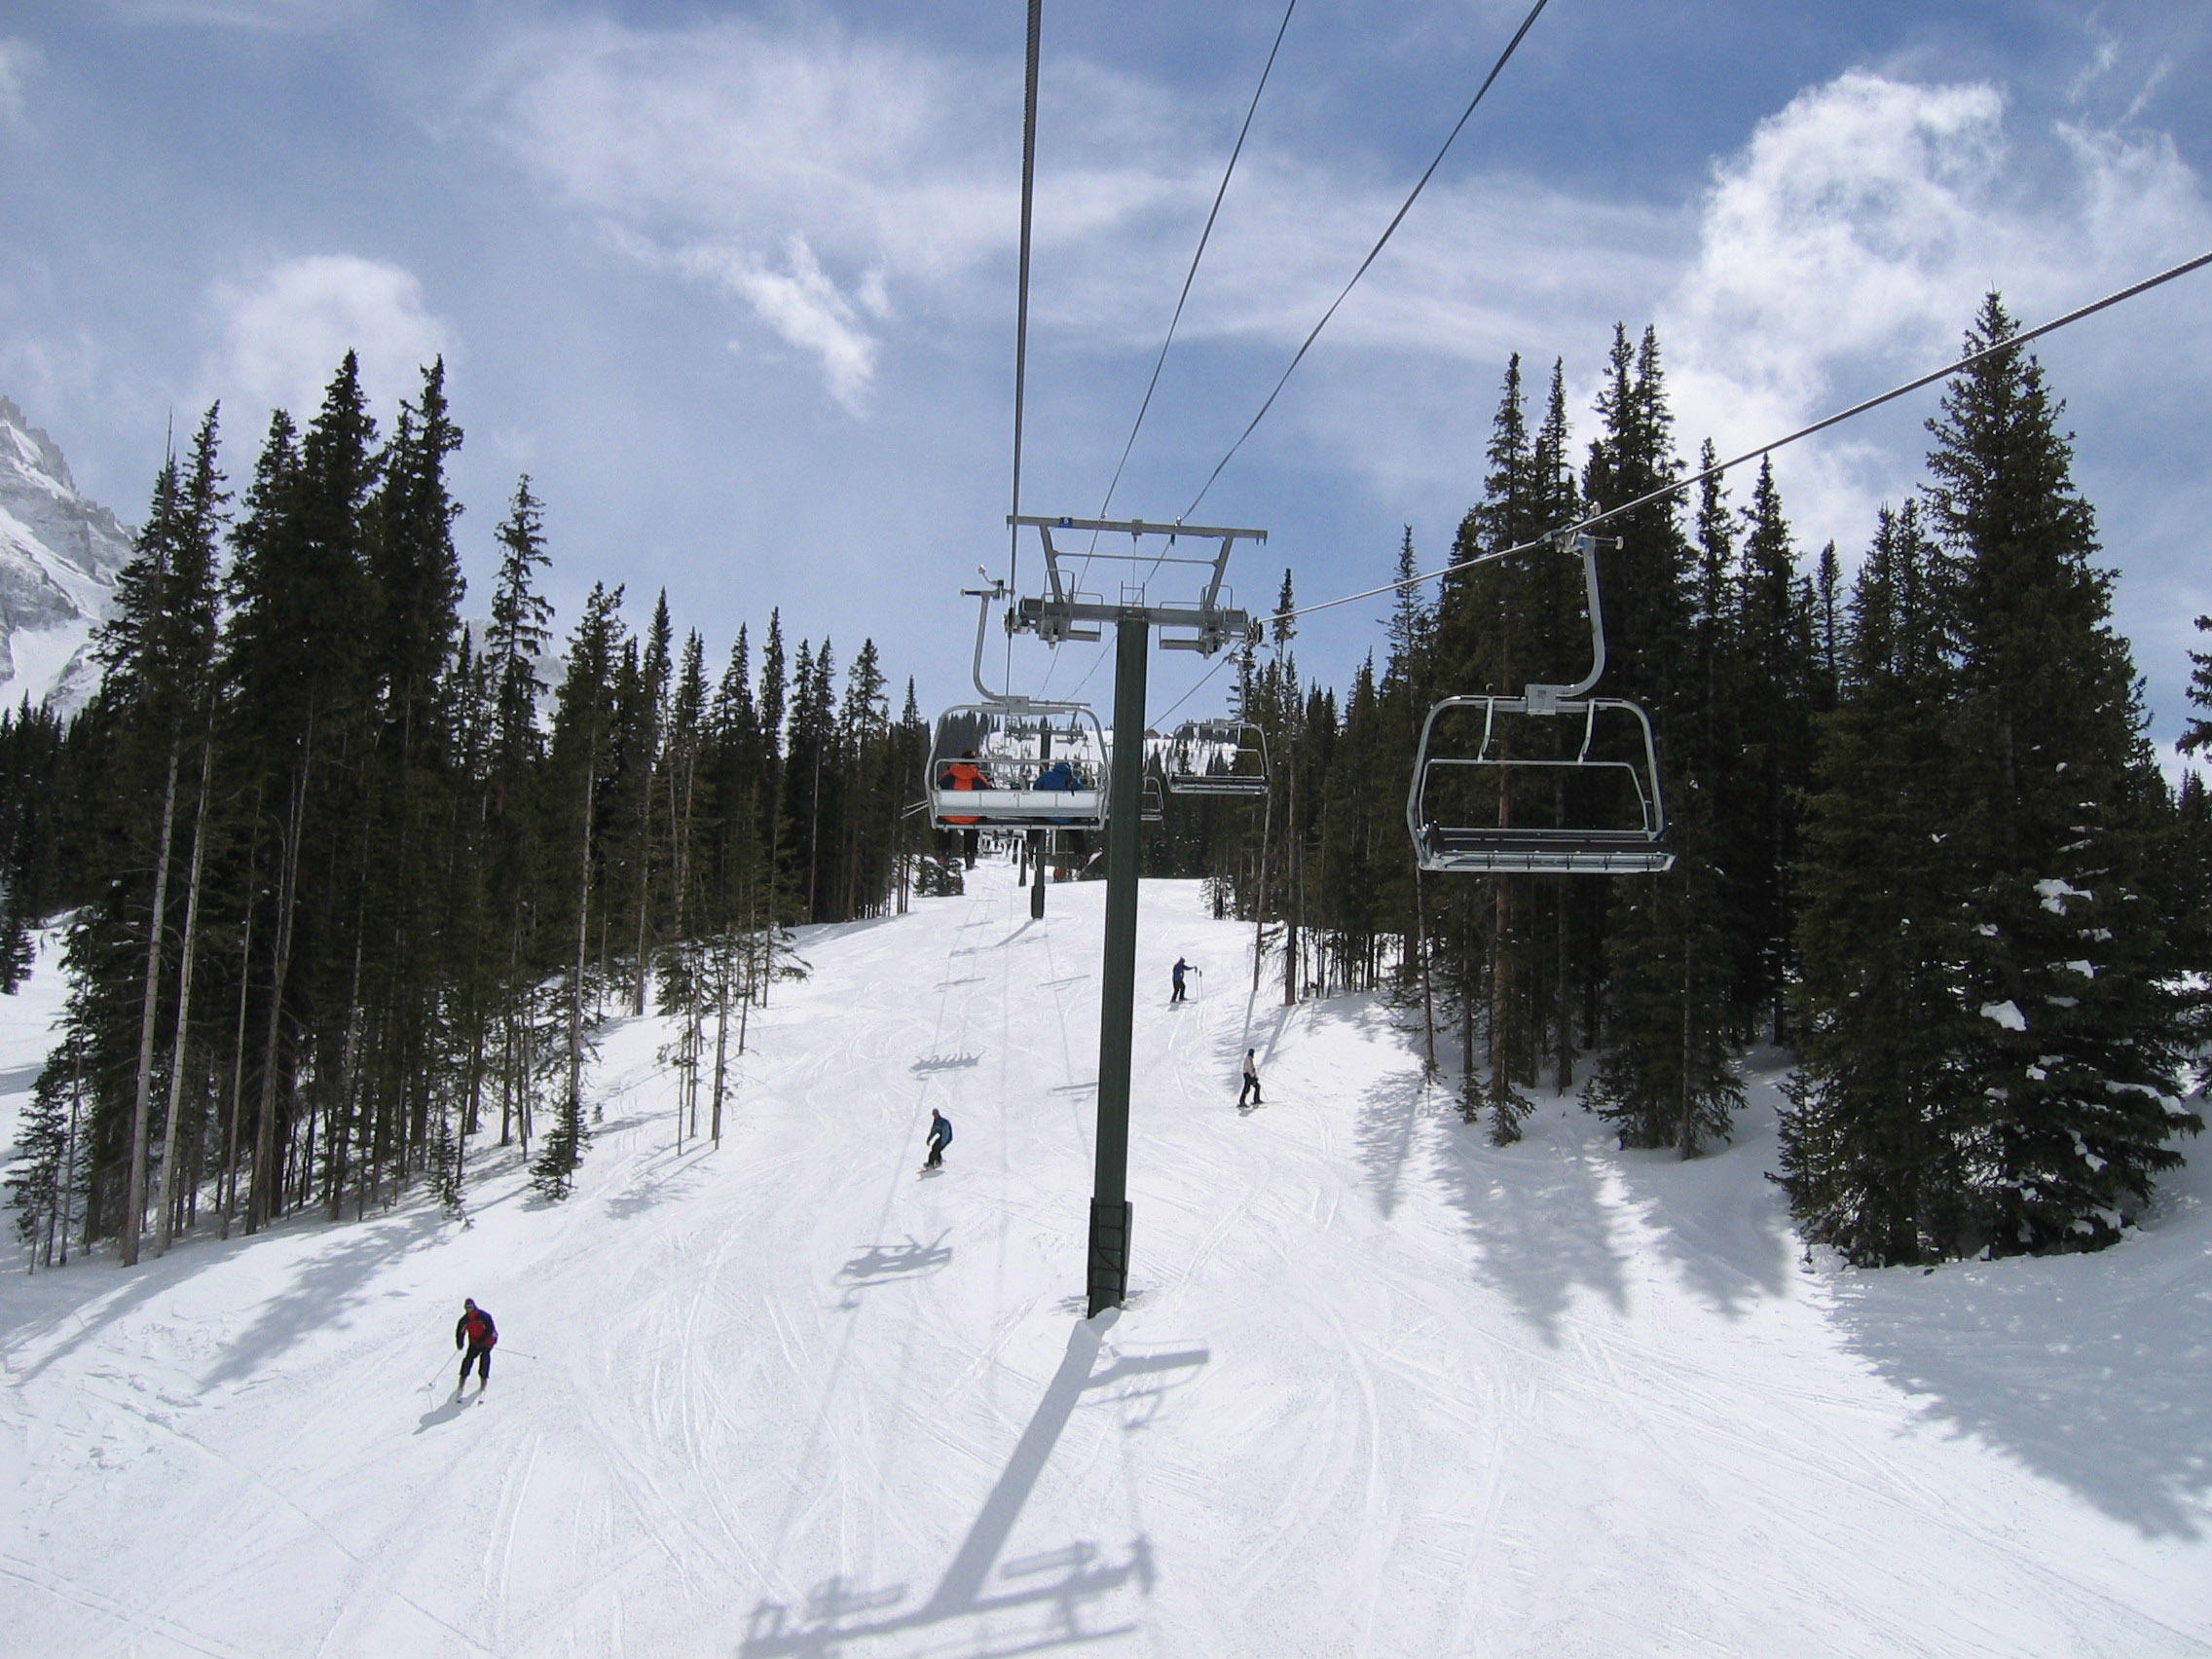 The chairlift photo